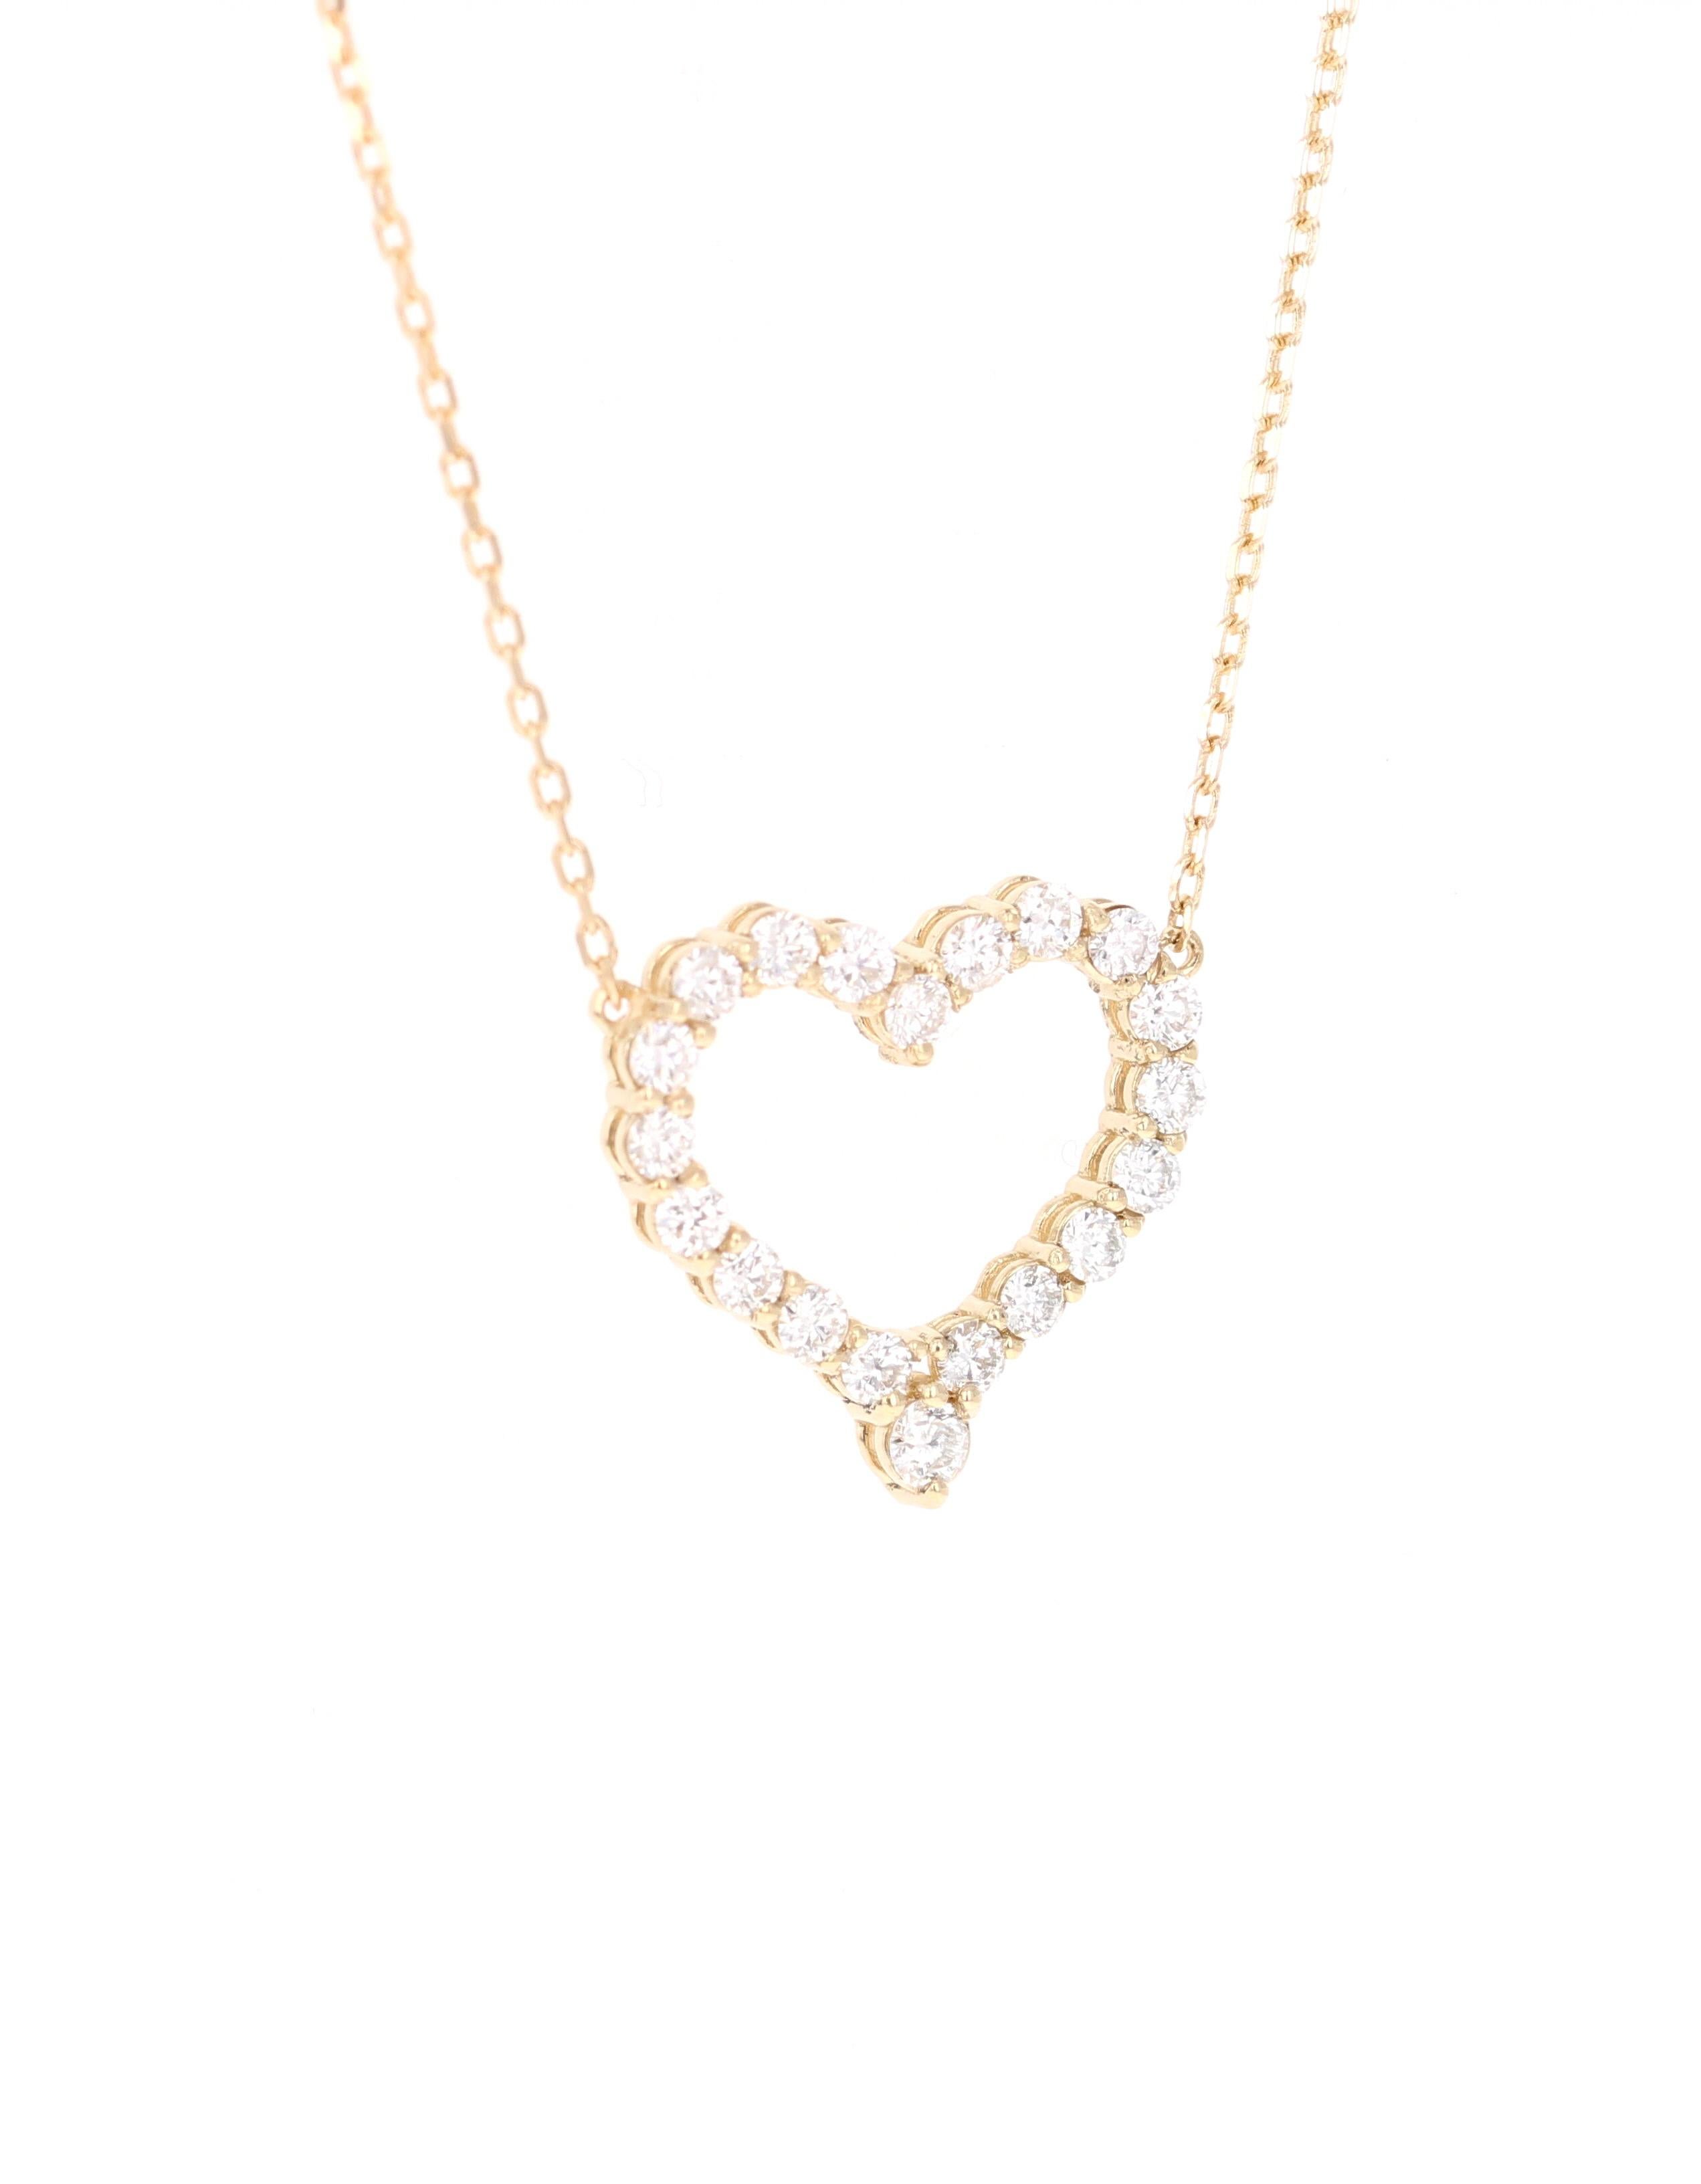 This beautiful and classy Heart pendant has 20 Round Cut Diamonds (Clarity: SI, Color: F) that weigh 0.59 Carats. 

It is beautifully curated in 14 Karat Yellow Gold and weighs 2.2 grams and is approximately 16.5 inches long.  The chain and pendant